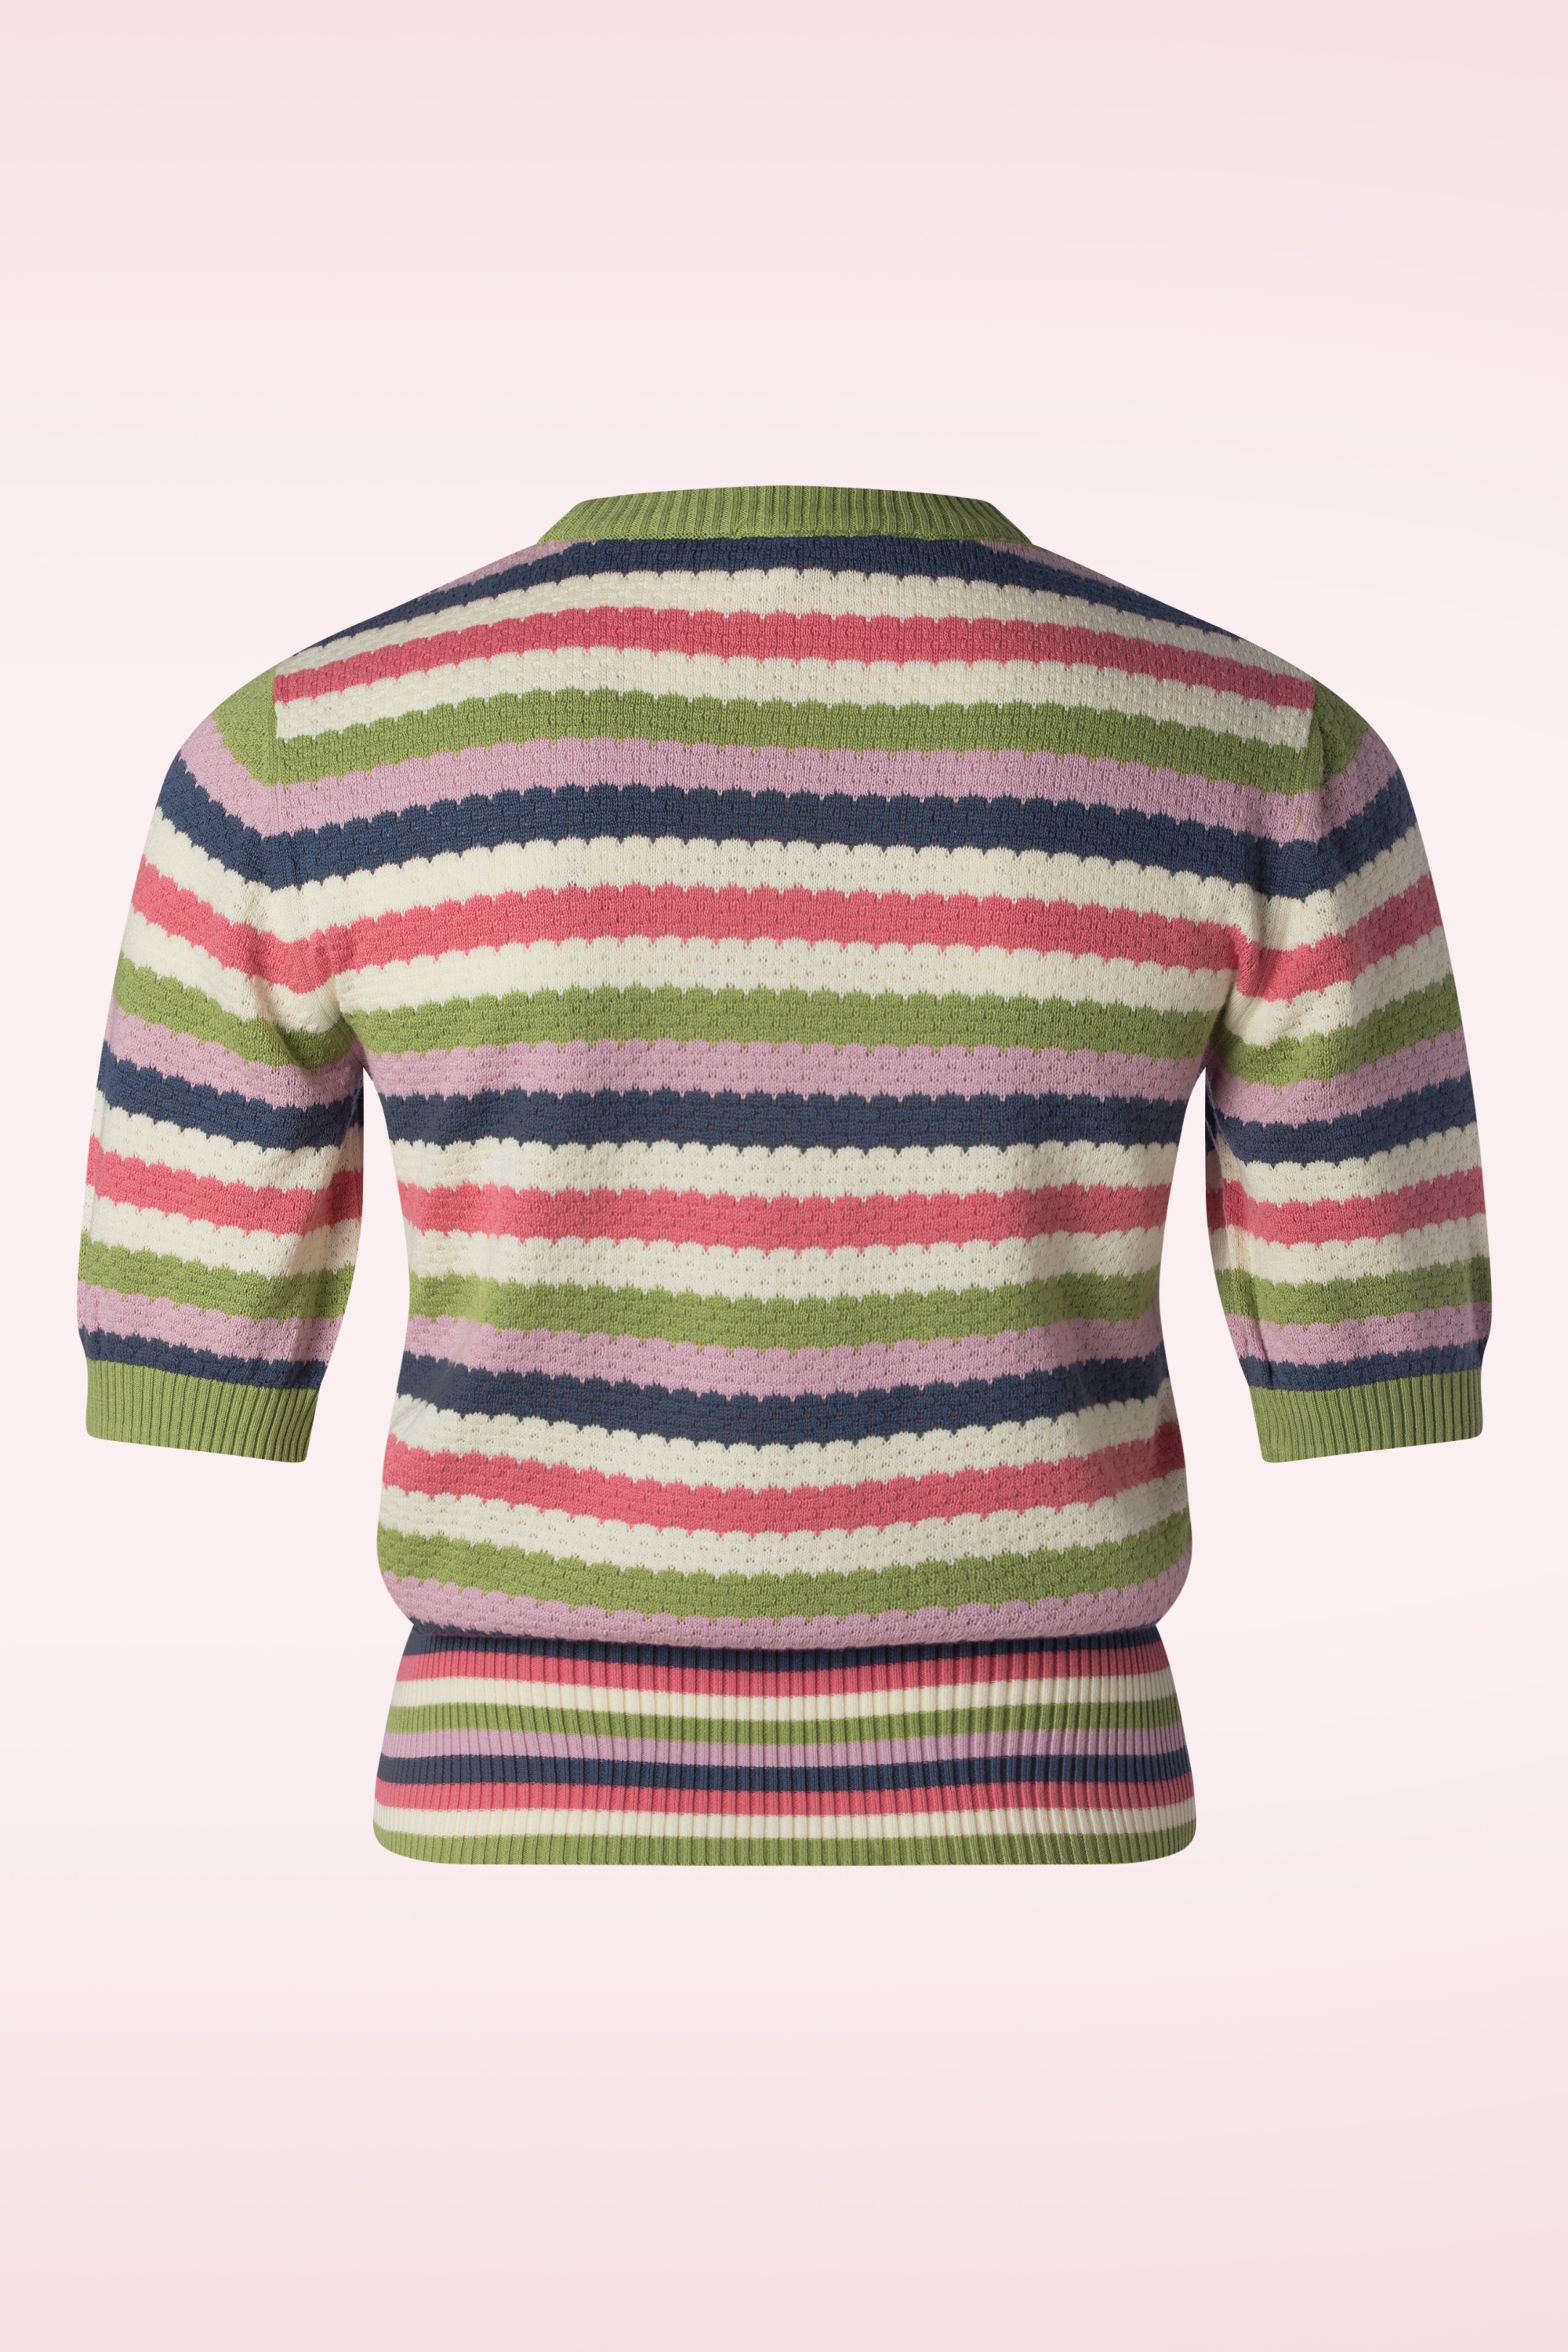 Circus - Knitted Waffle top in multi 2